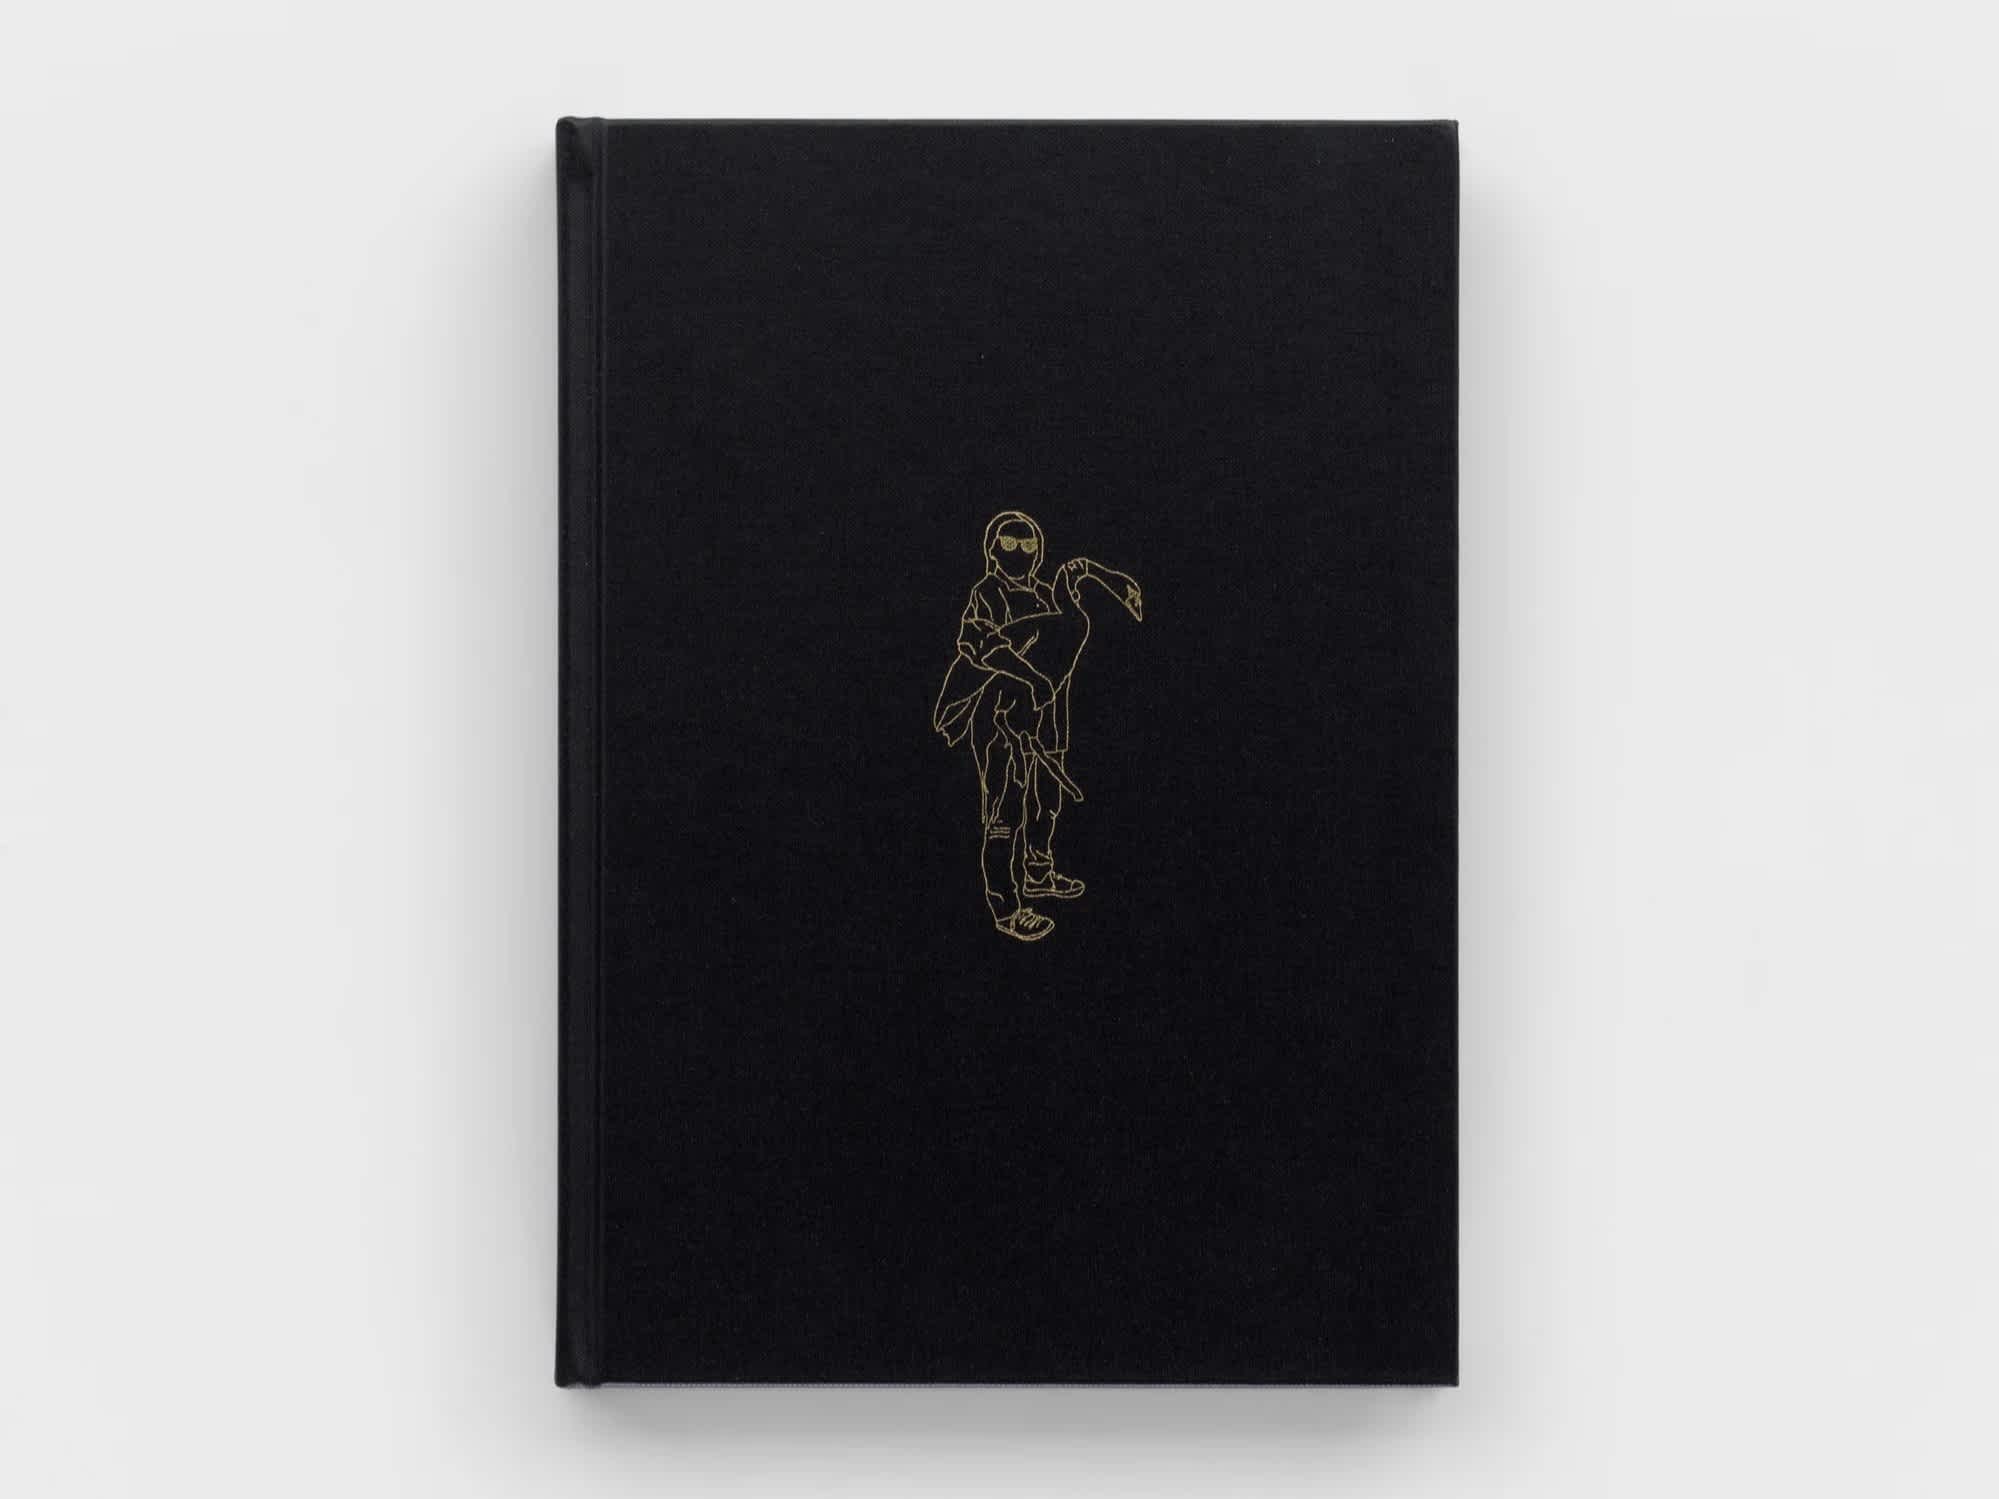 Black book cover with a gold embossed drawing of a person holding a flamingo.